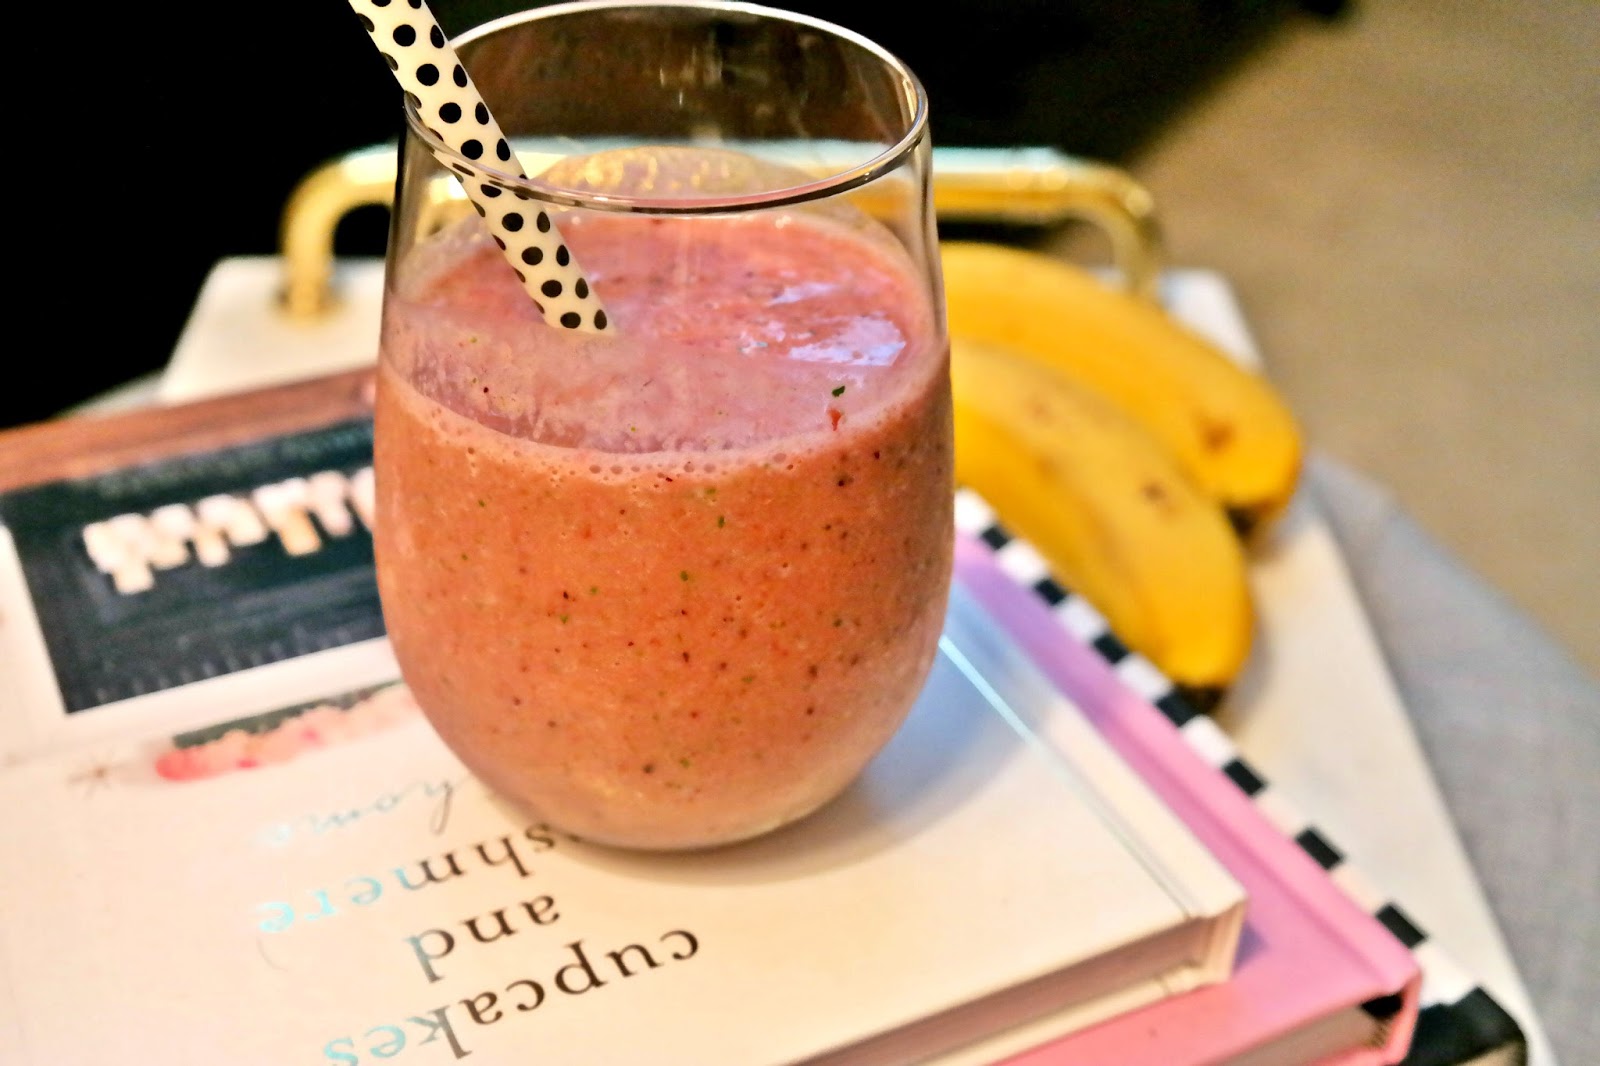 Smoothie with Strawberries and banana